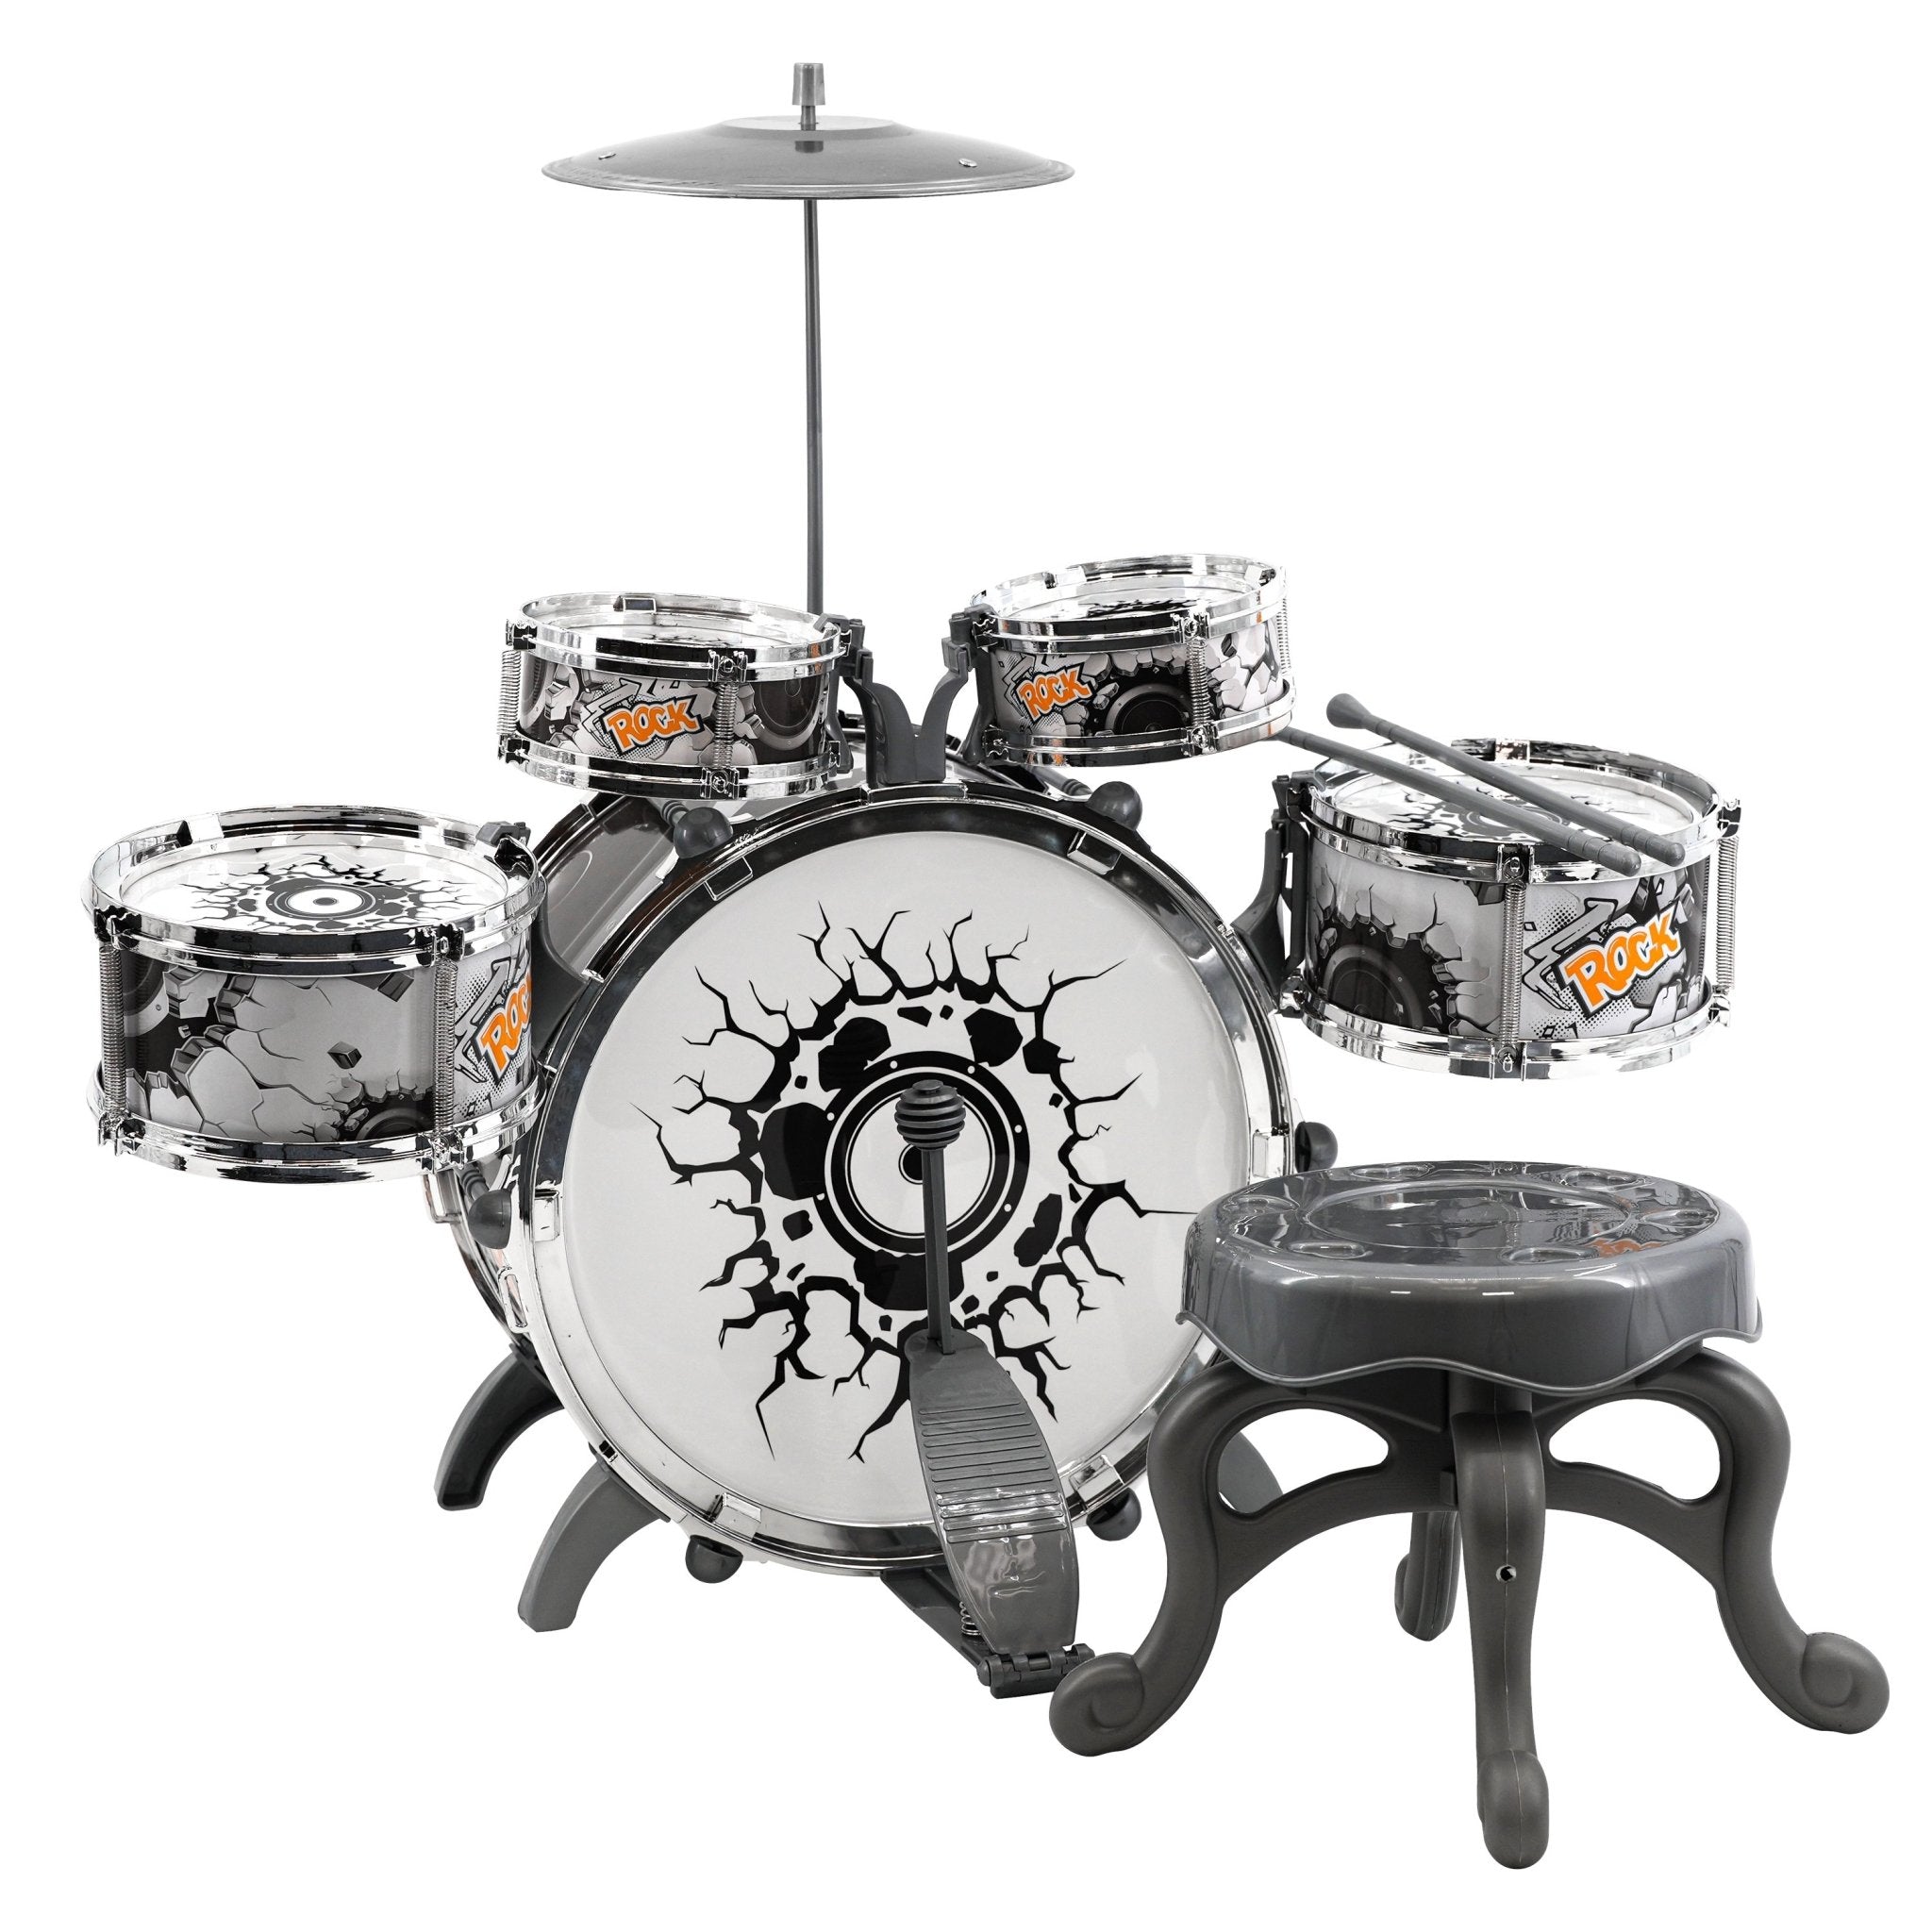 Kids Black and White Drum Kit Play Set The Magic Toy Shop - The Magic Toy Shop